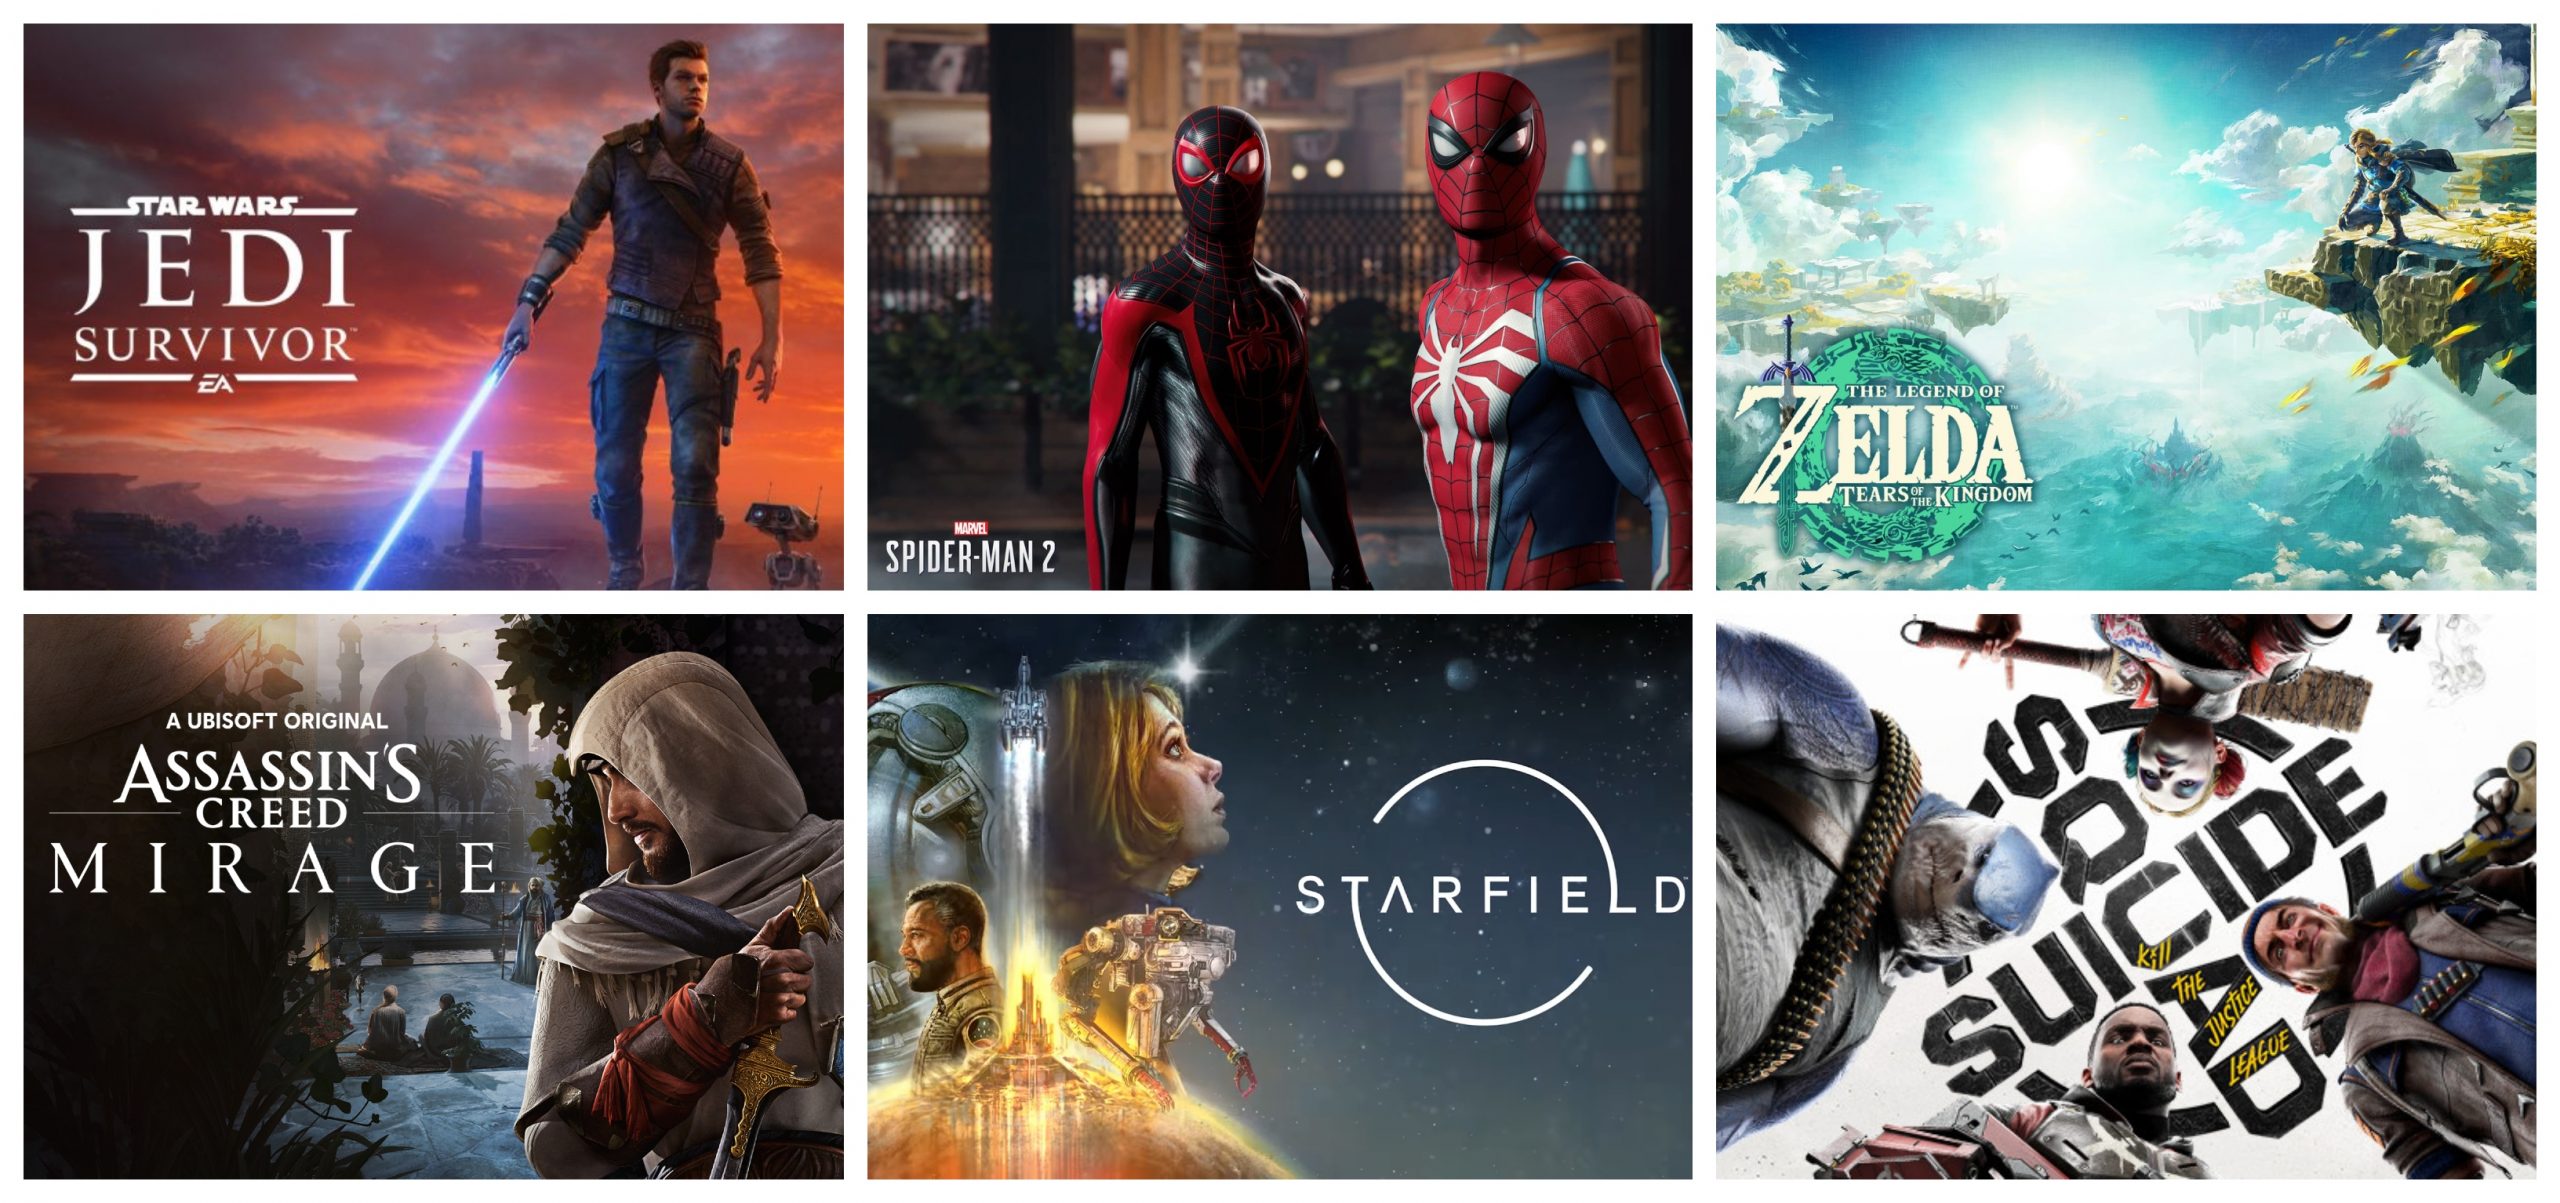 AIPT's 40 most anticipated video games of 2023 • AIPT